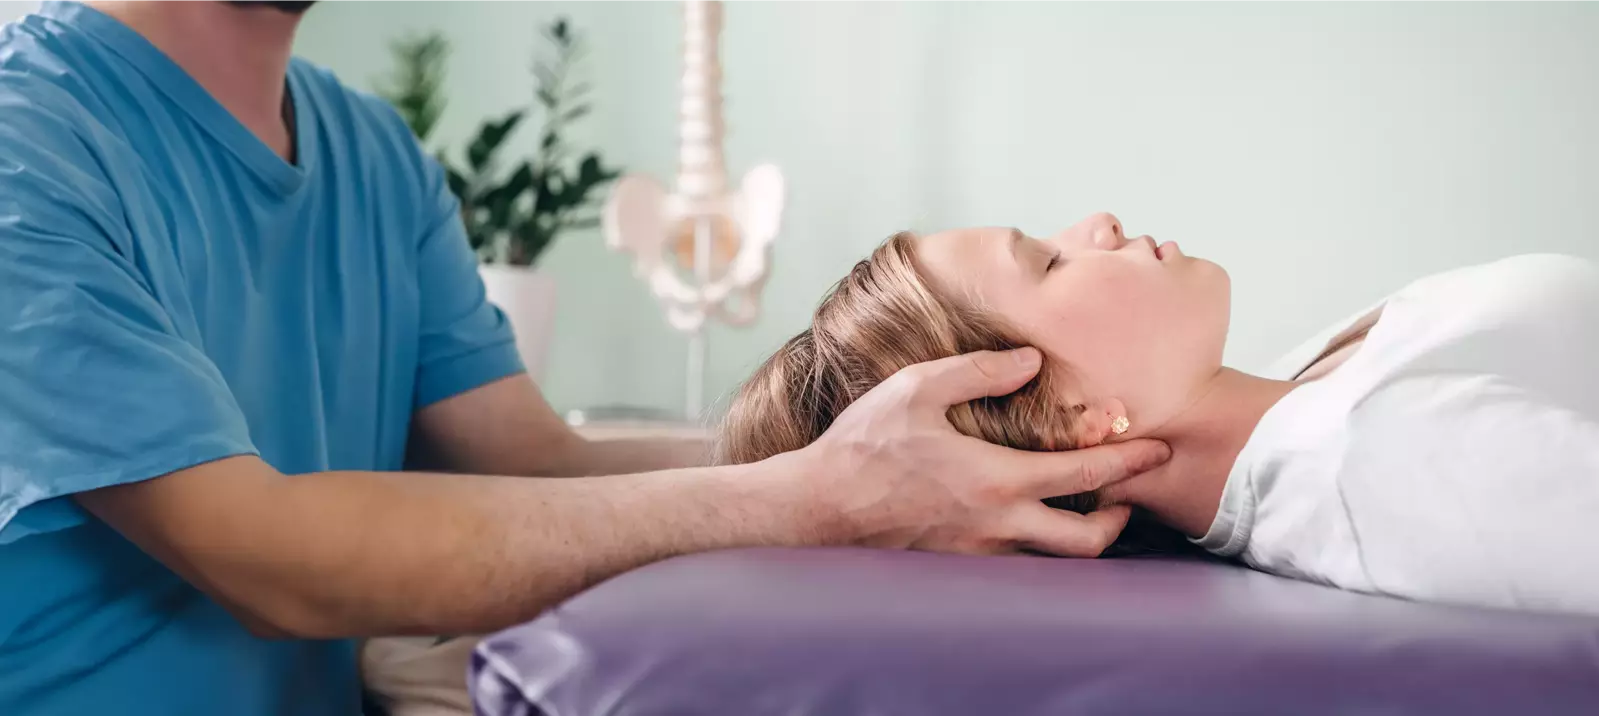 woman lying down with doctor's hands on her head